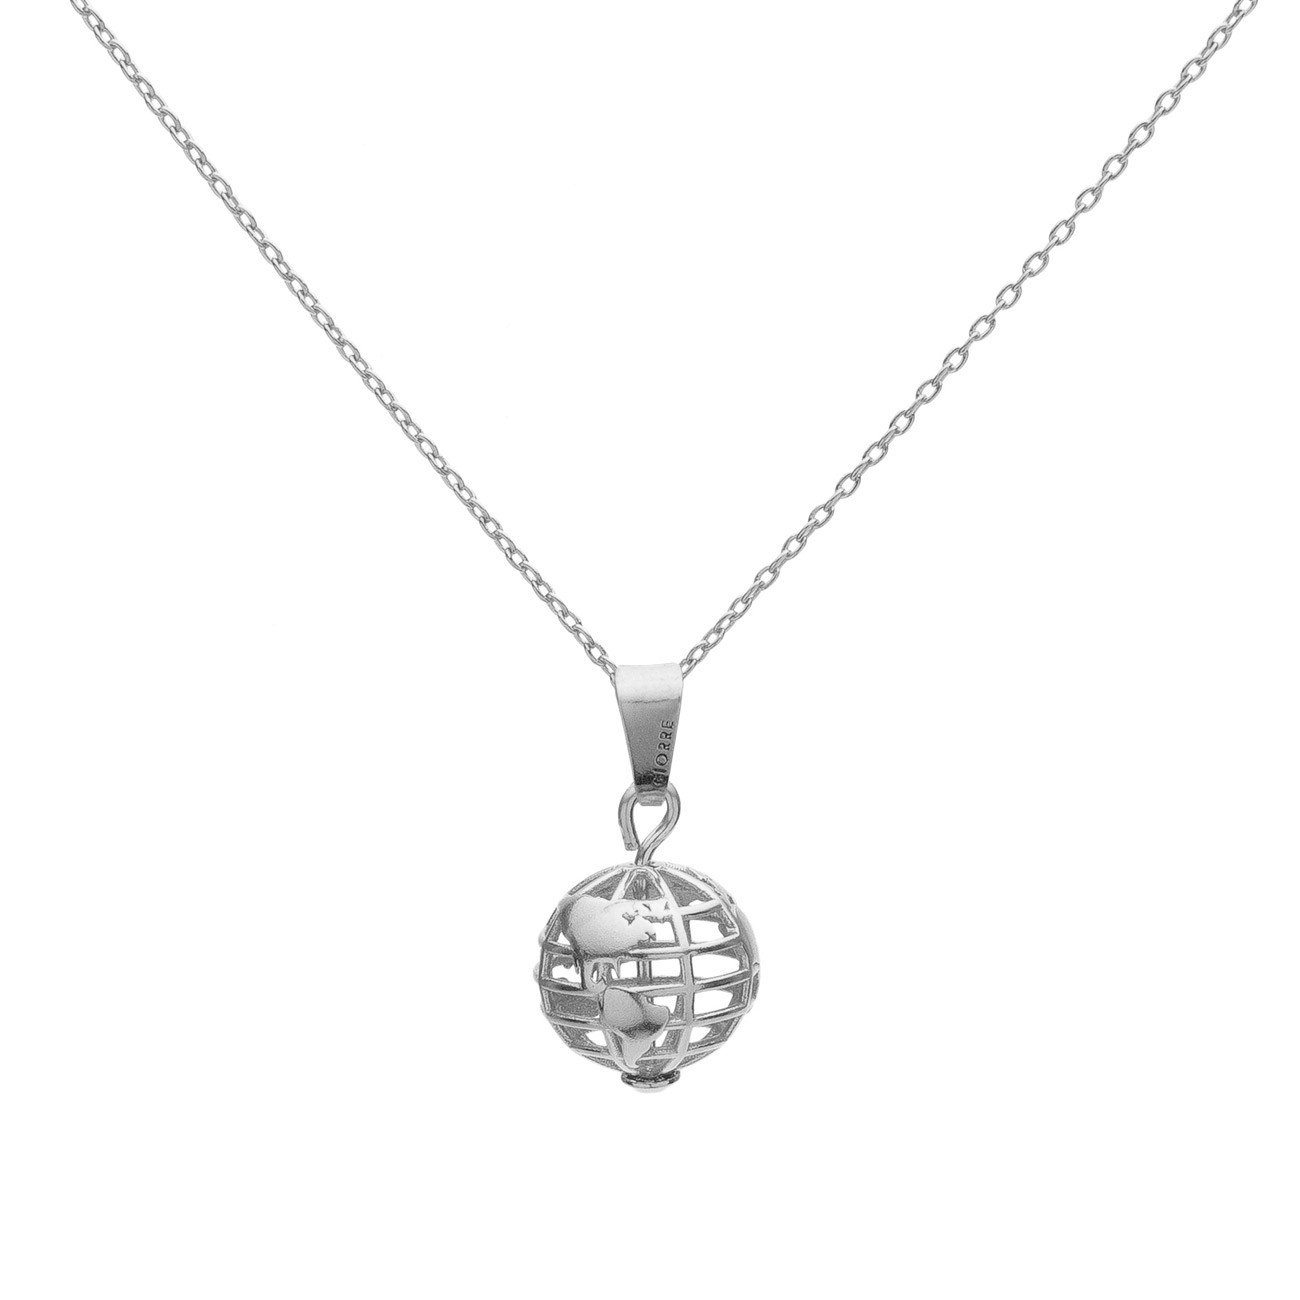 Planet earth necklace, Silver 925